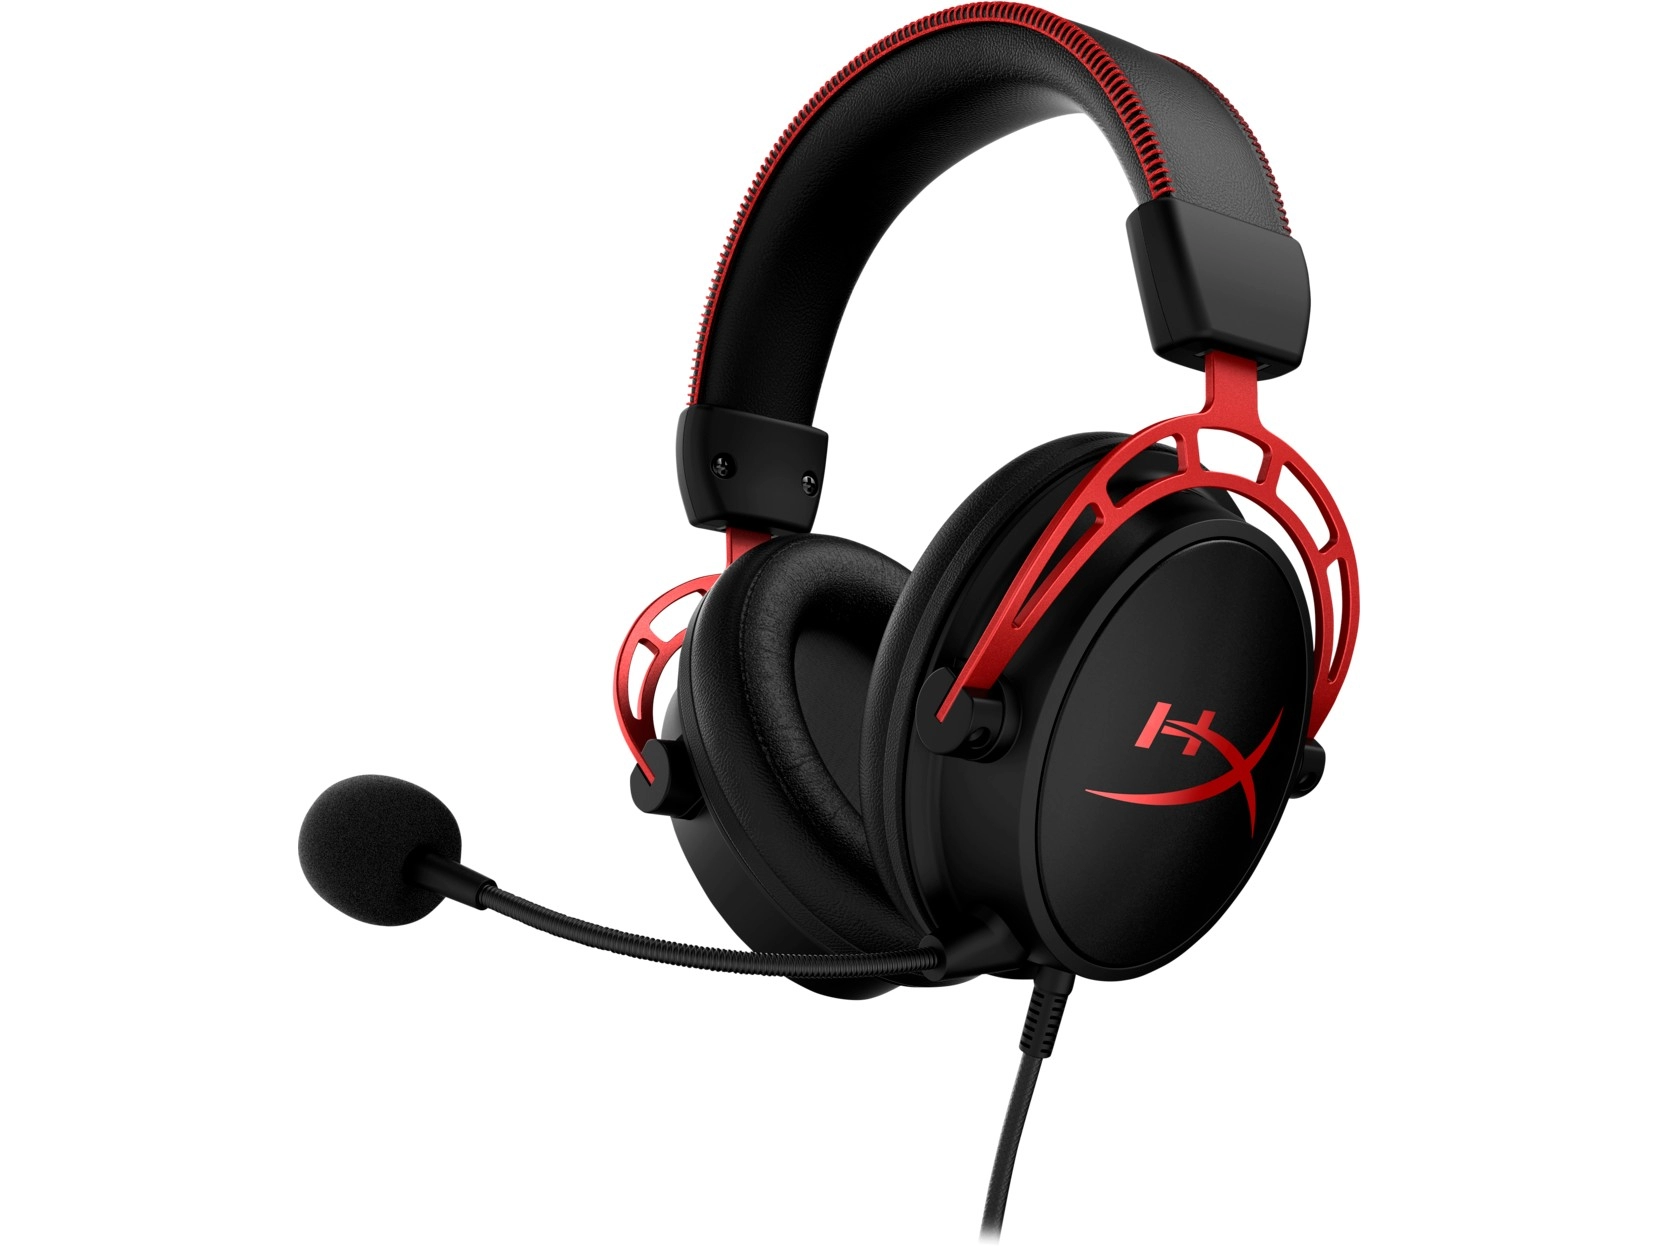 Headset  HyperX Cloud Alpha, Black/Red, Solid aluminium build, Microphone: detachable, Frequency response: 13Hz–27,000 Hz, Detachable headset cable length:1m+2m extension, Dual Chamber Drivers, 3.5 jack, Pure Hi-Fi capable,  Braided cable